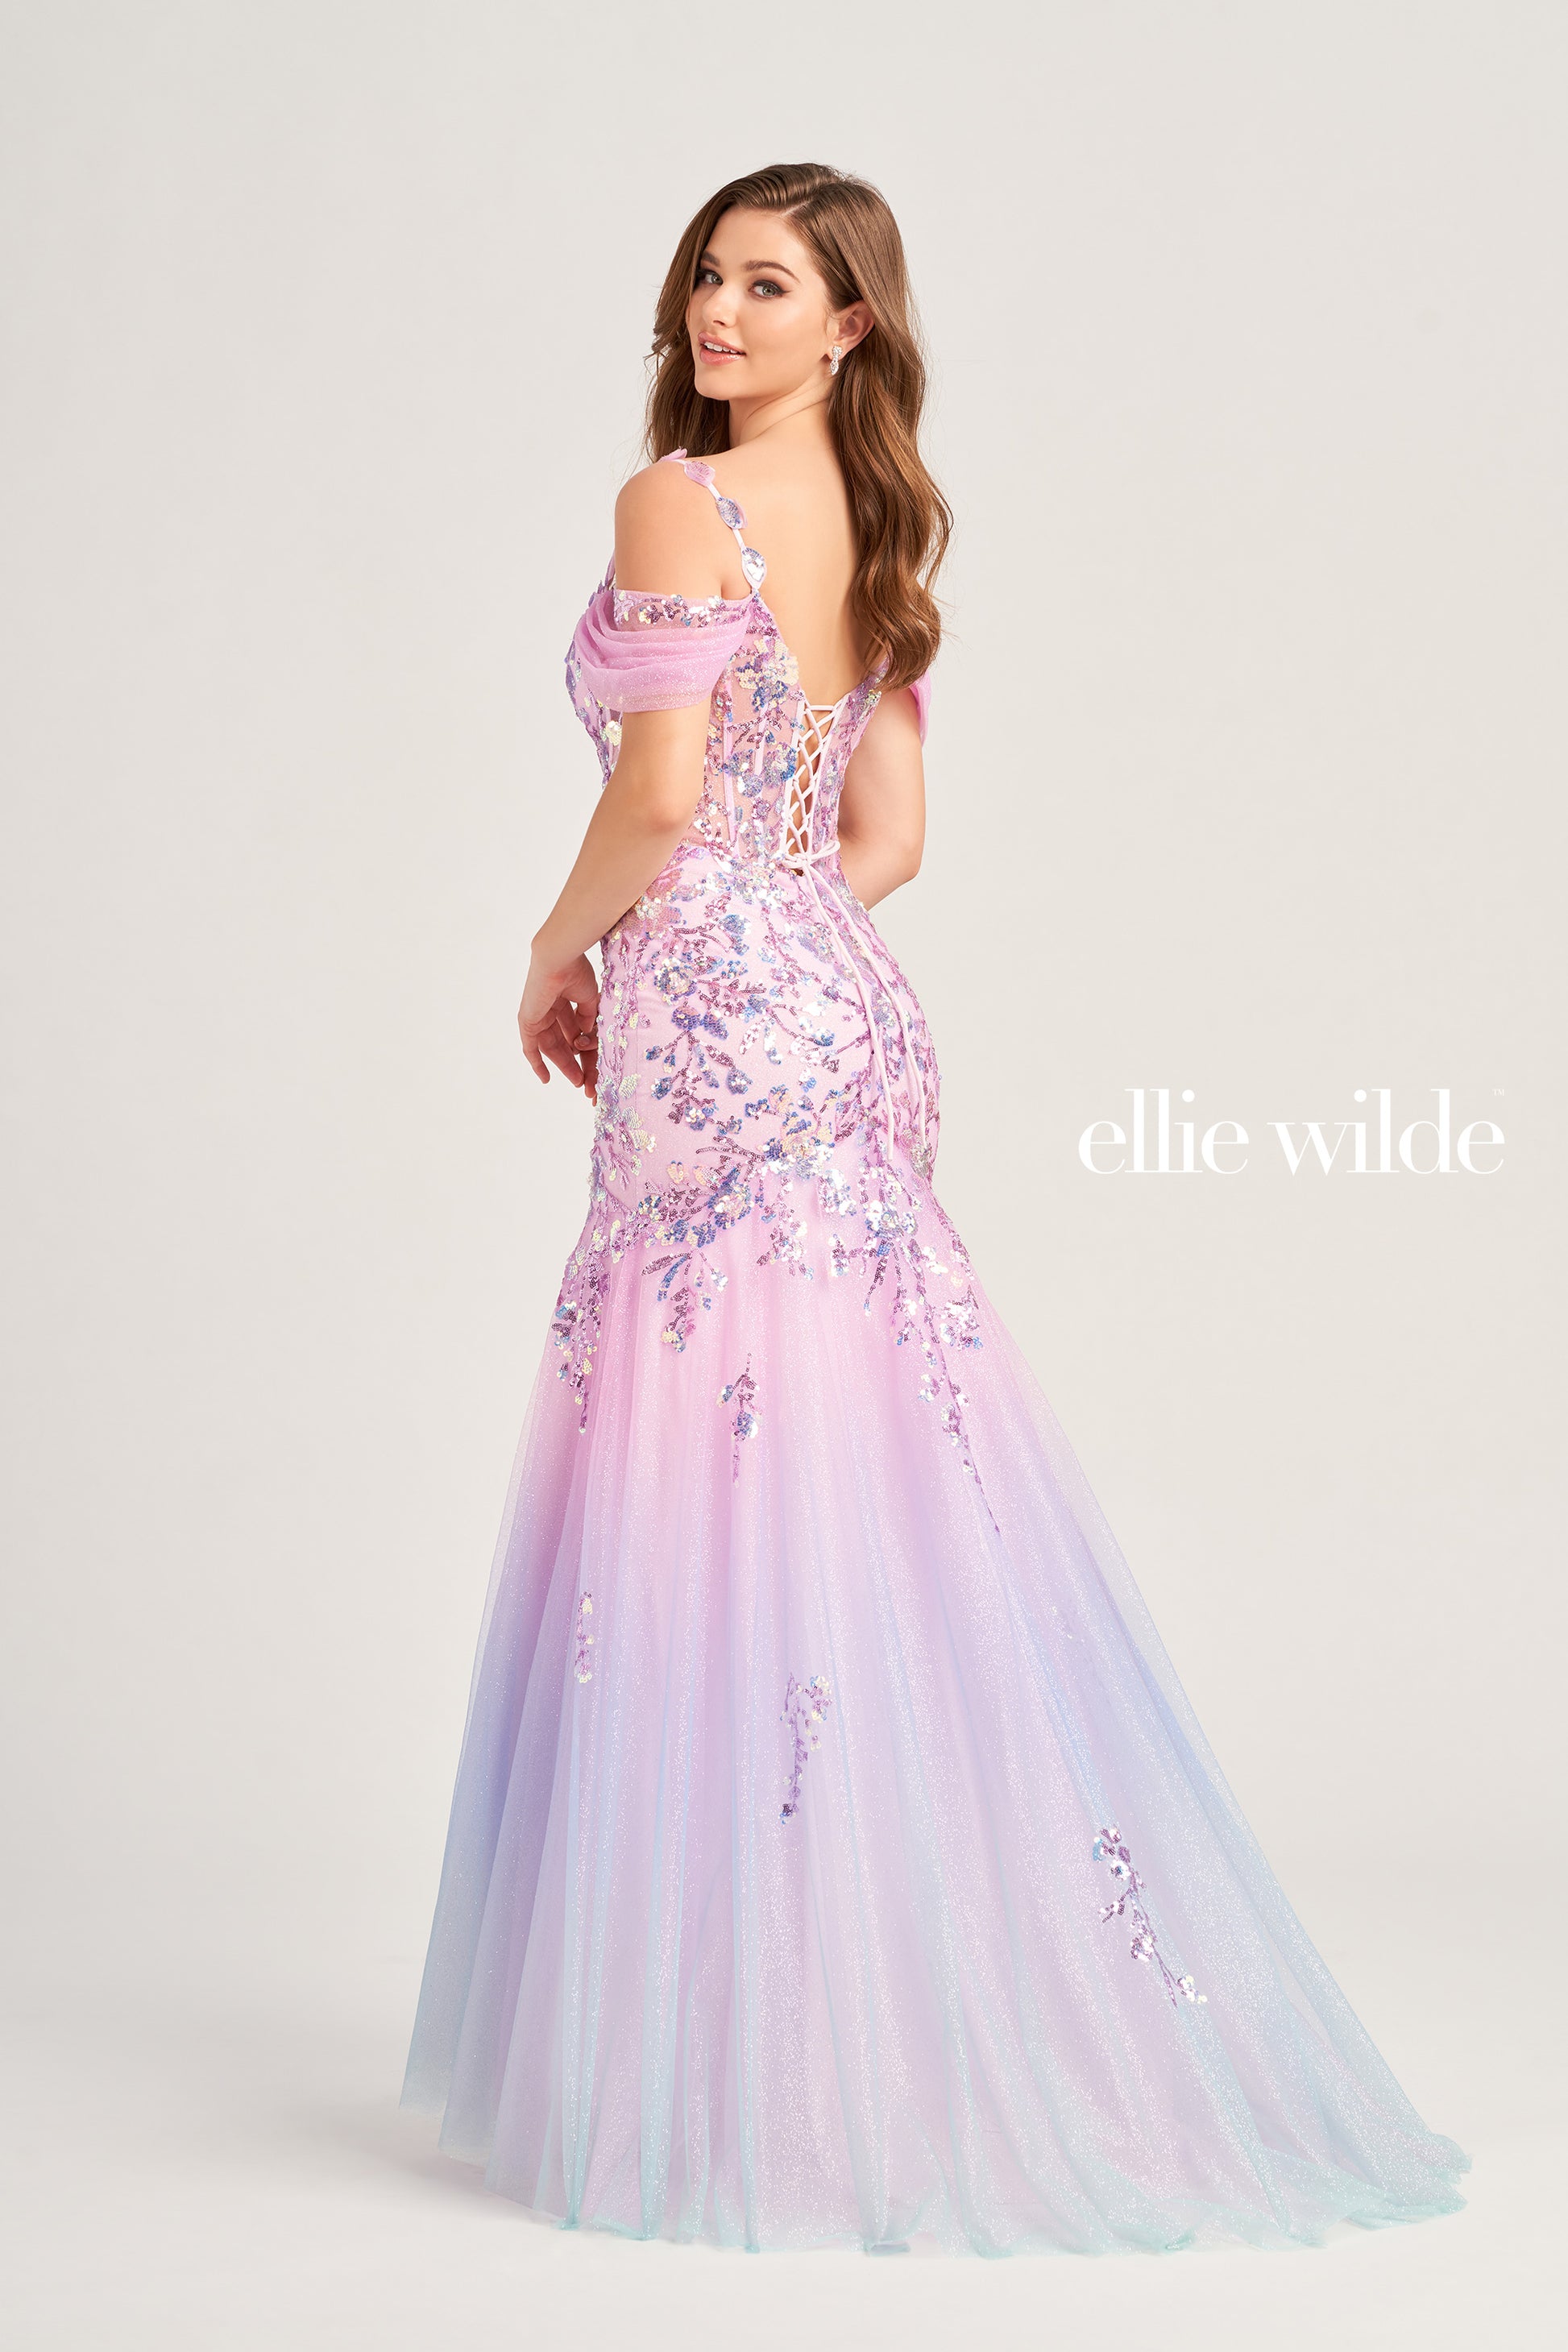 The Ellie Wilde EW35056 Ombre Sequin Sheer Corset Prom Dress will make a show-stopping entrance. It features a corset bodice, detachable off-shoulder glitter tulle straps, and a lace-up back for a custom fit. The mermaid silhouette and ombre sequin sheer fabric guarantee a glamorous look on your special night.  COLOR: COTTON CANDY, LIME SORBET, SEA BREEZE SIZE: 00 - 20